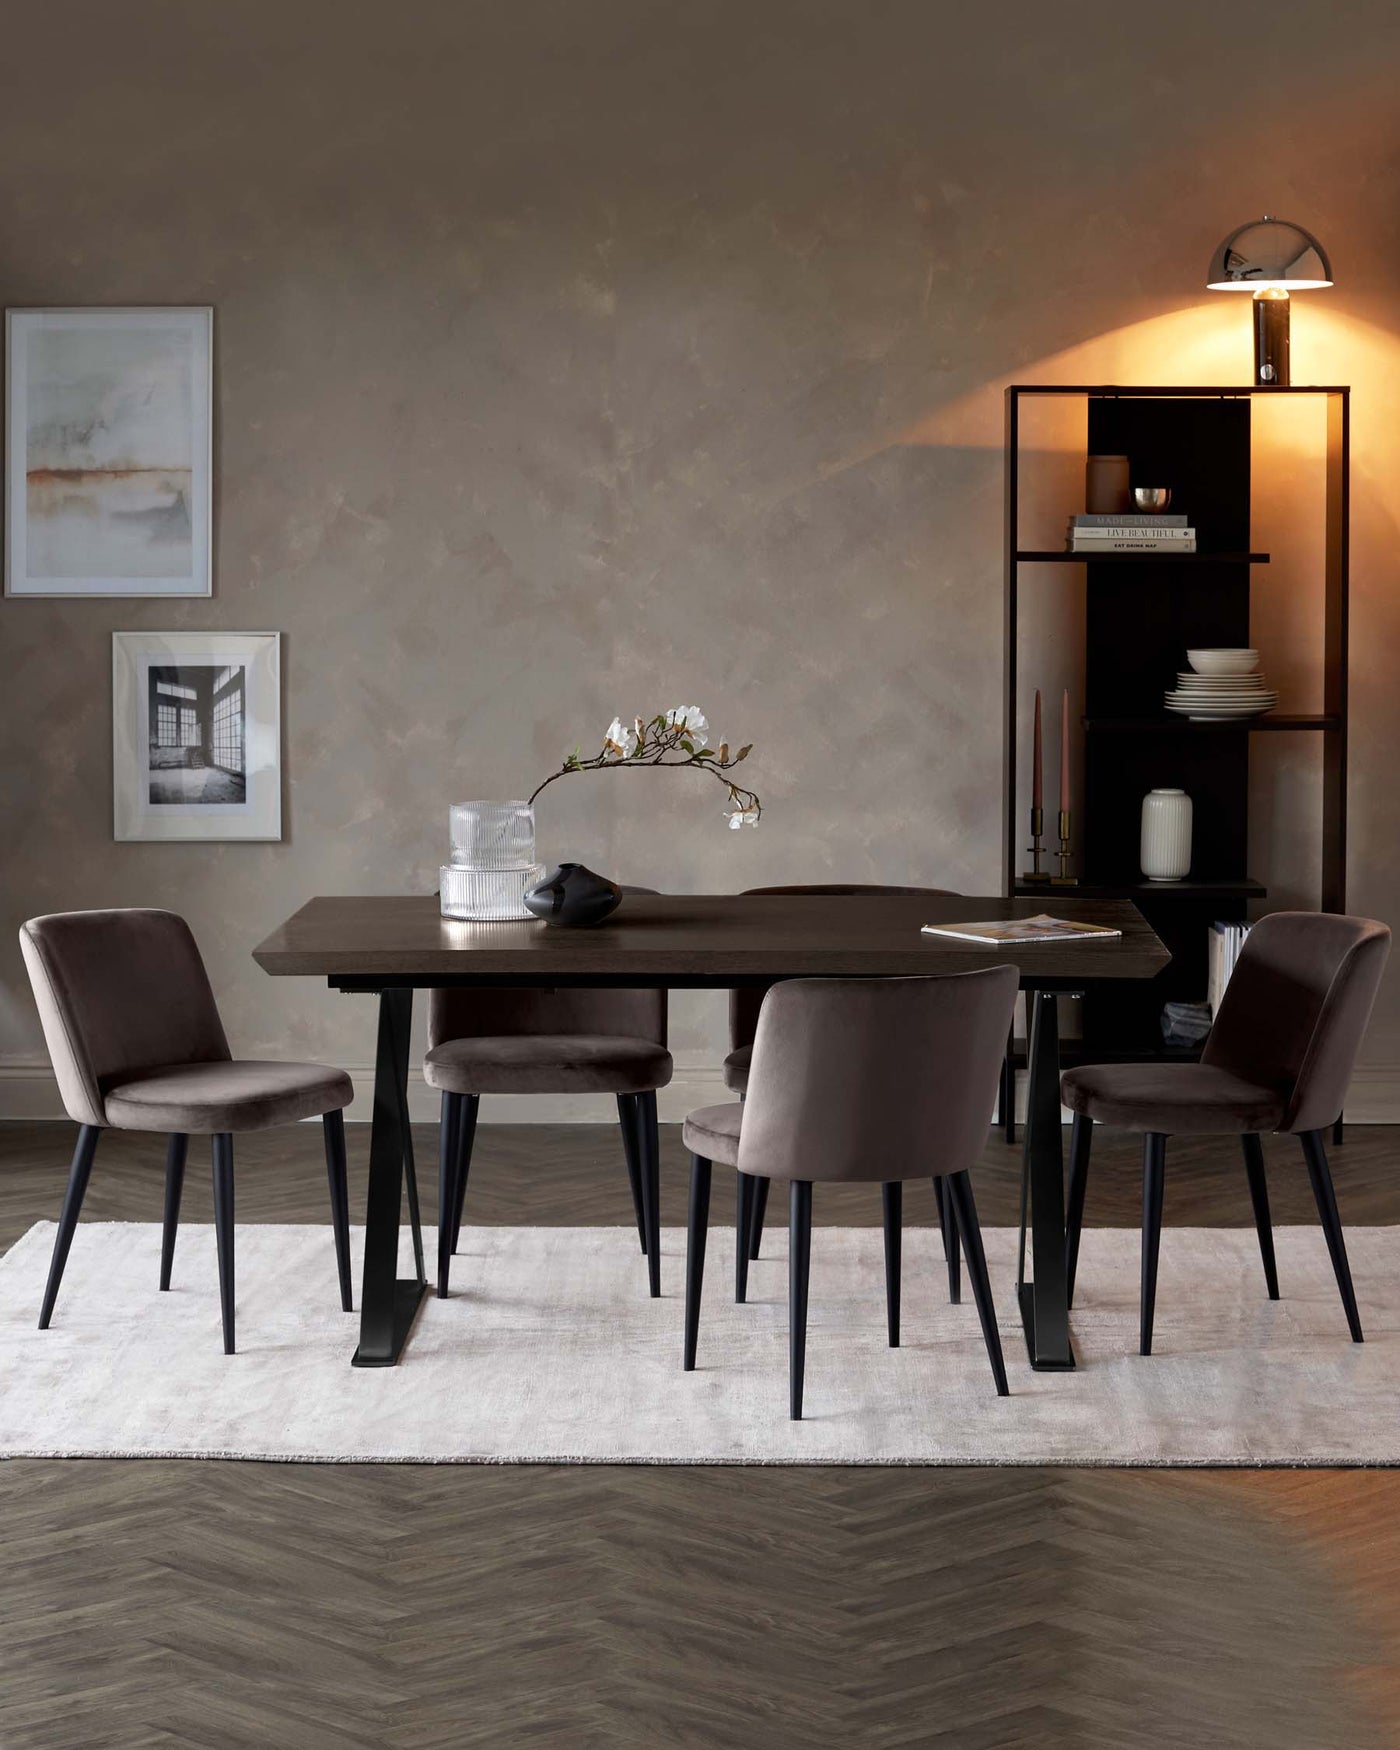 Modern dining room furniture set showcasing a sleek rectangular dark wood table with black angled legs, complemented by four elegant upholstered chairs in a plush velvet-like fabric with black slender legs. A minimalist black framed shelving unit adorned with decorative items and a wall-mounted lamp with a dome shade complete the look, all arranged on a subtle area rug with neutral tones blending into the wooden floor.